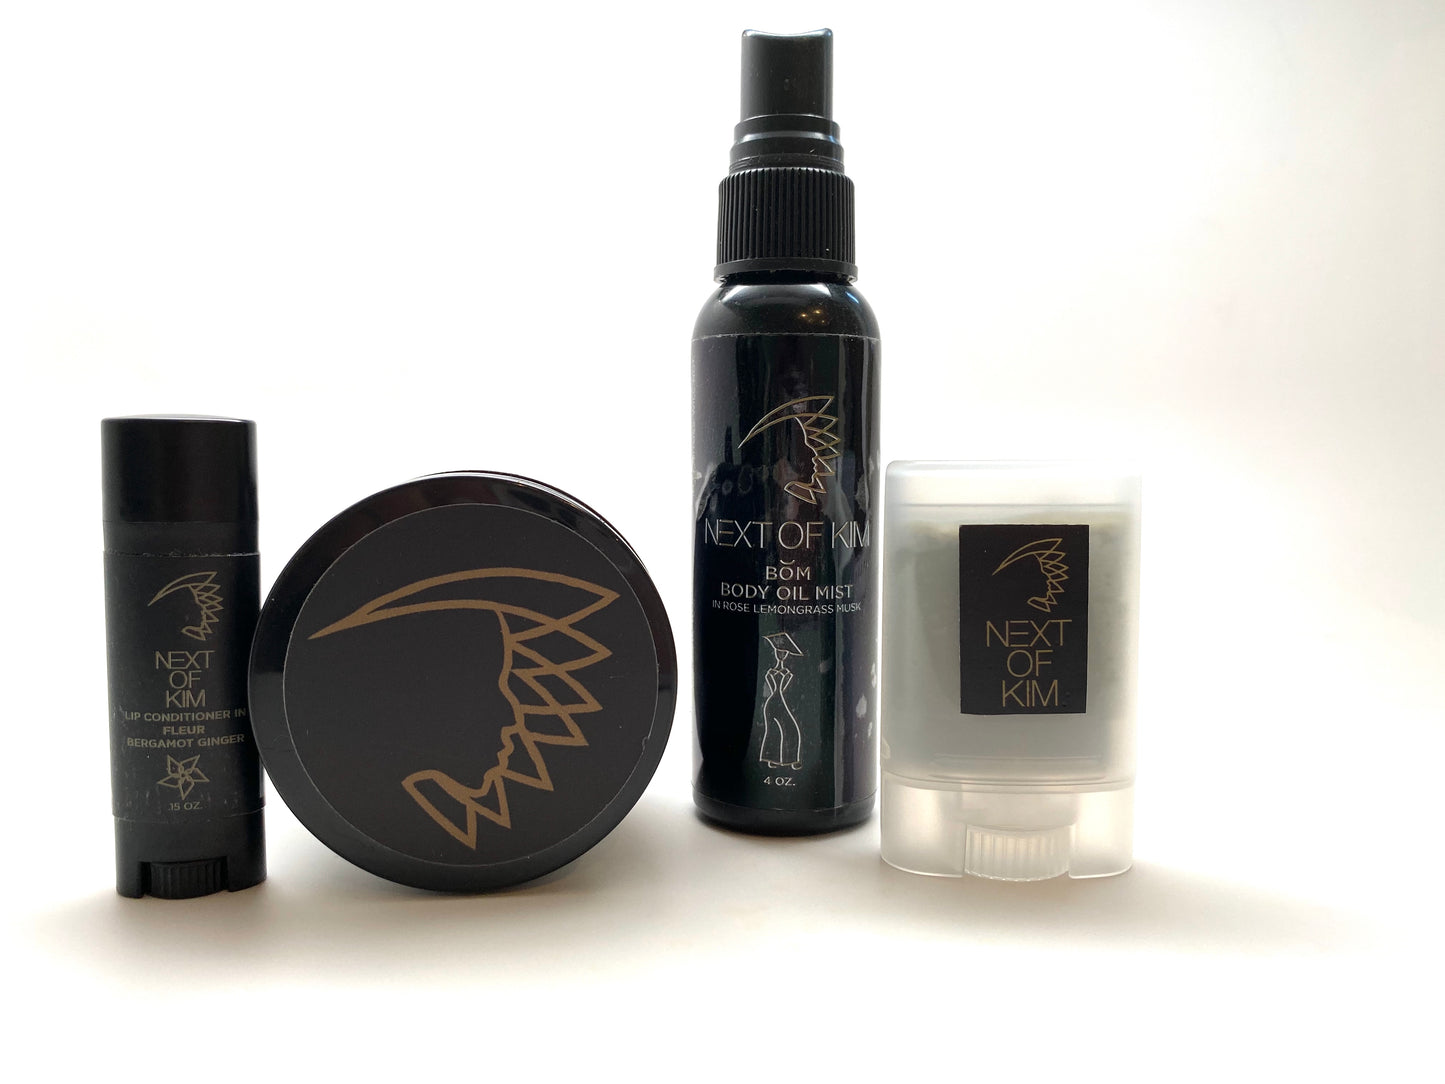 The NOK Commitment Issue Gift Set